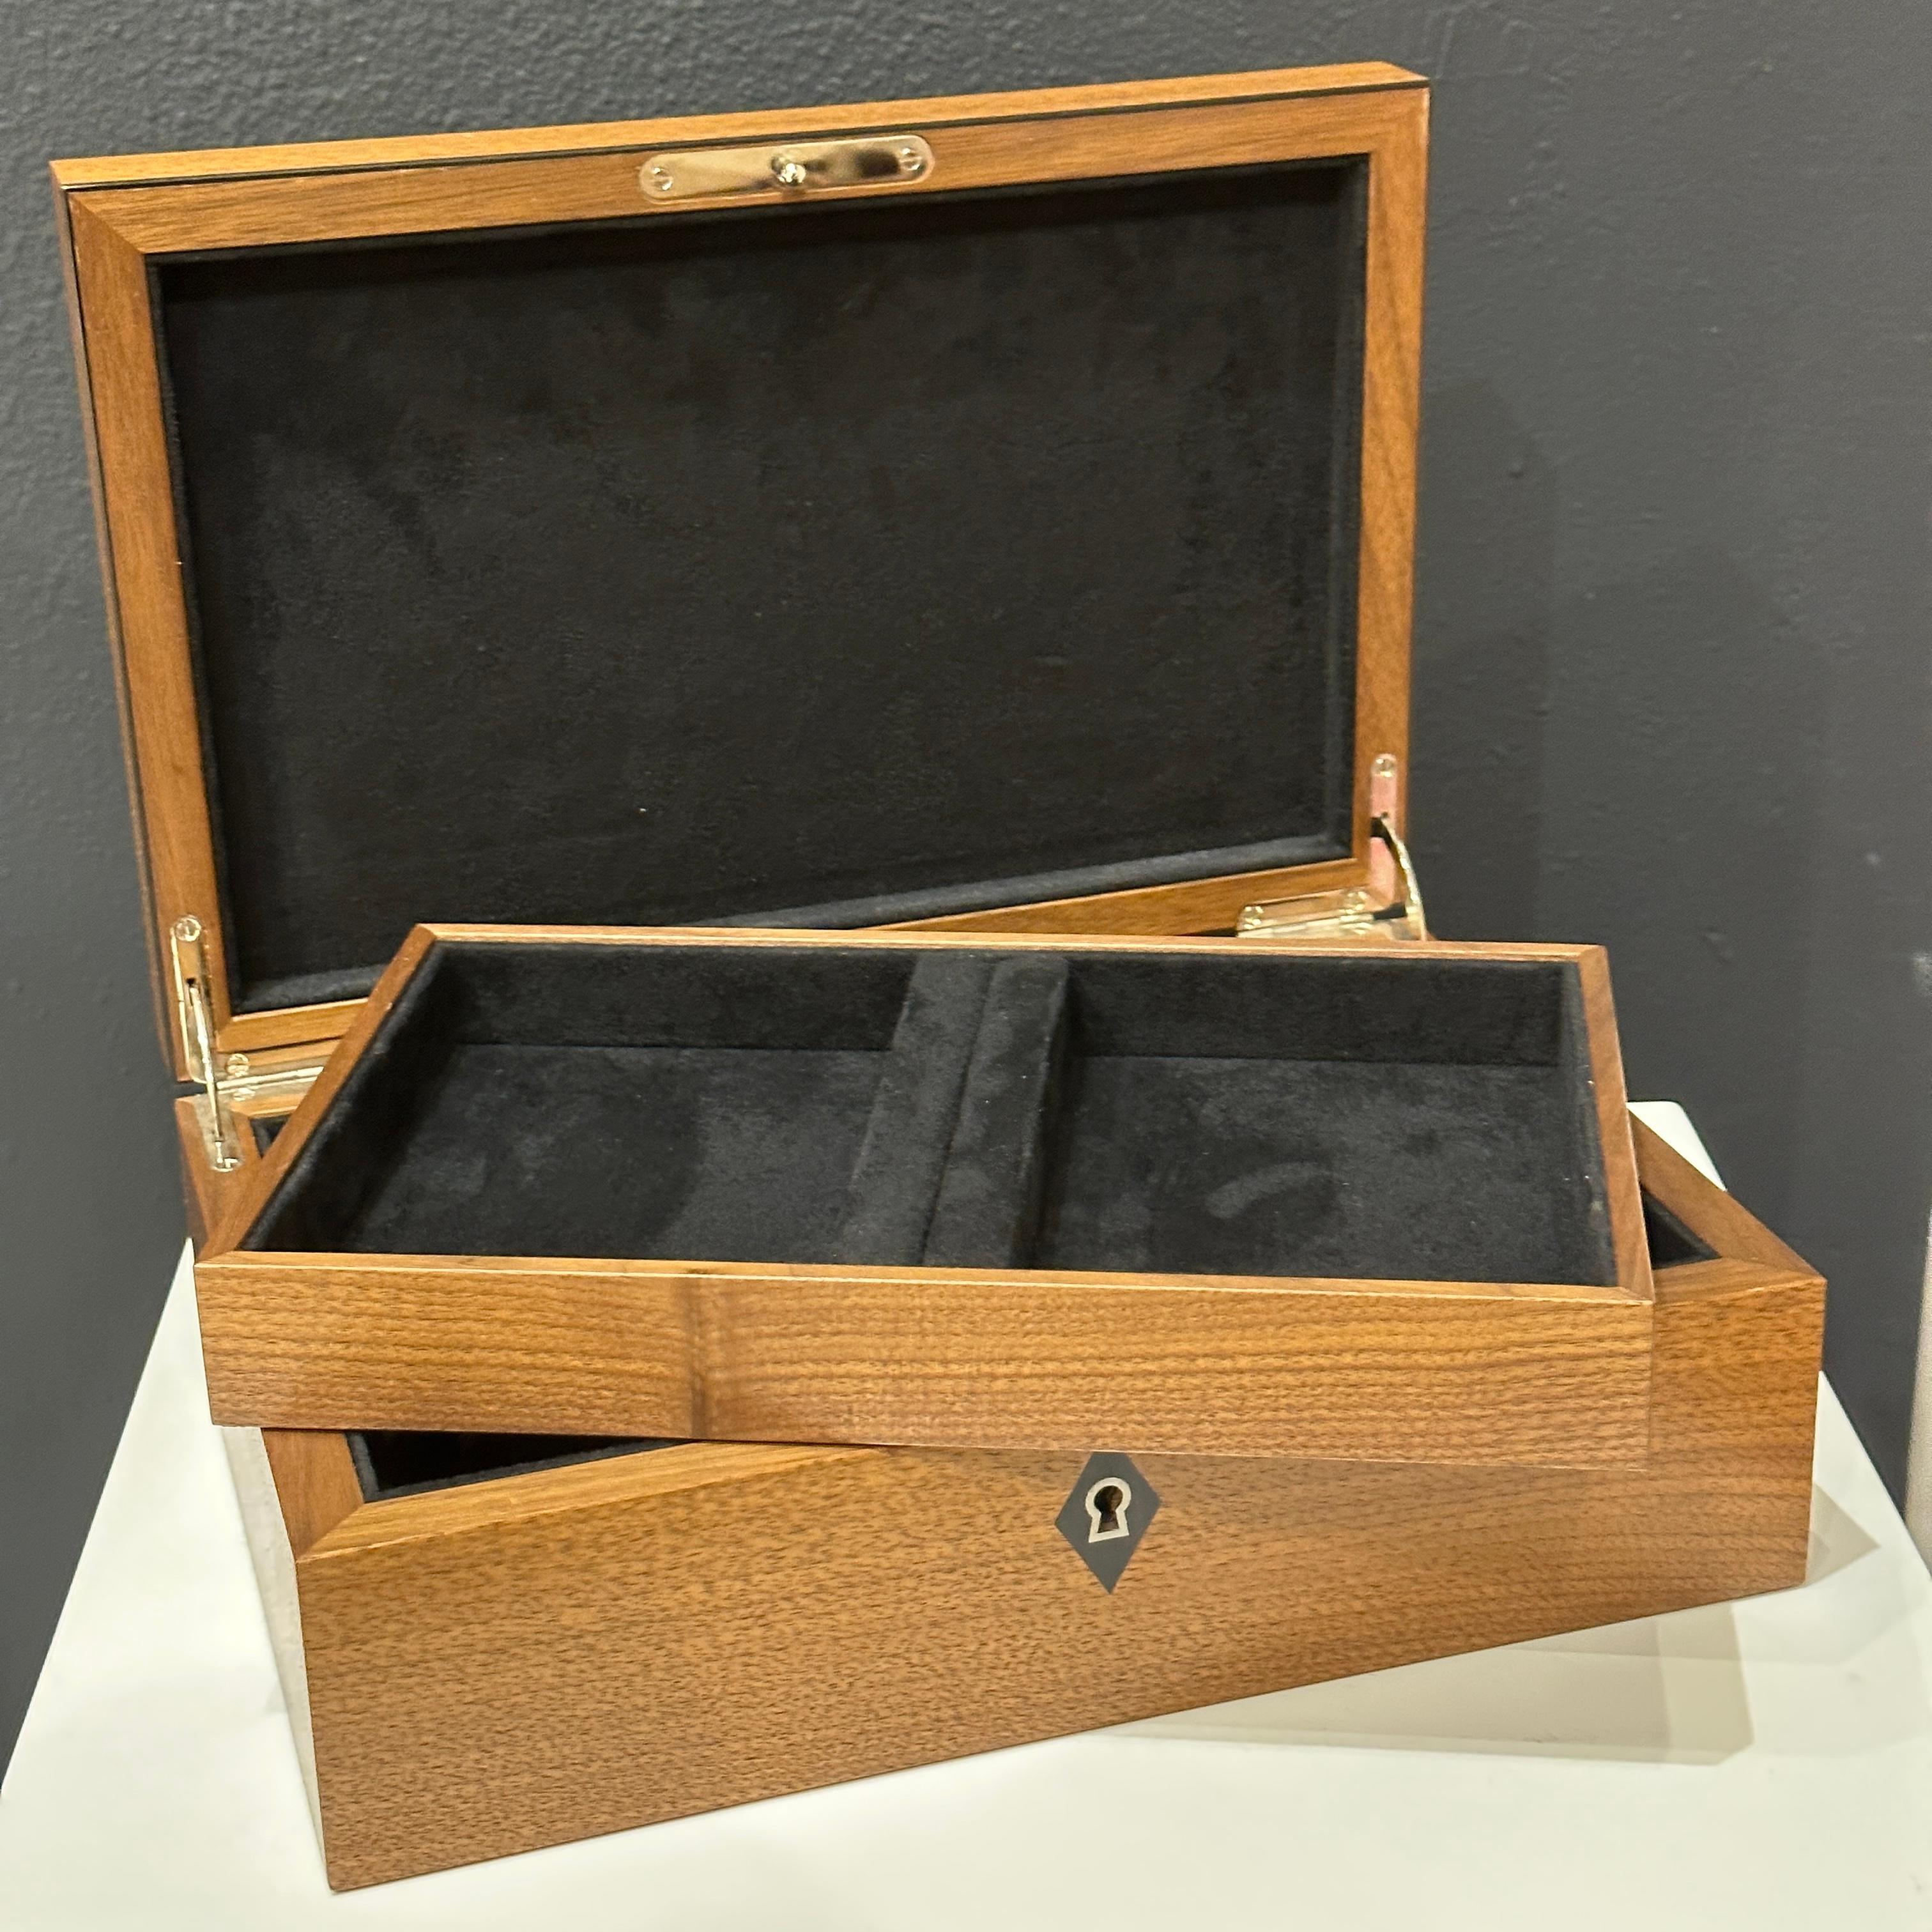 Contemporary David Linley London Marquetry Watch and Cufflink Jewelry Box with Key